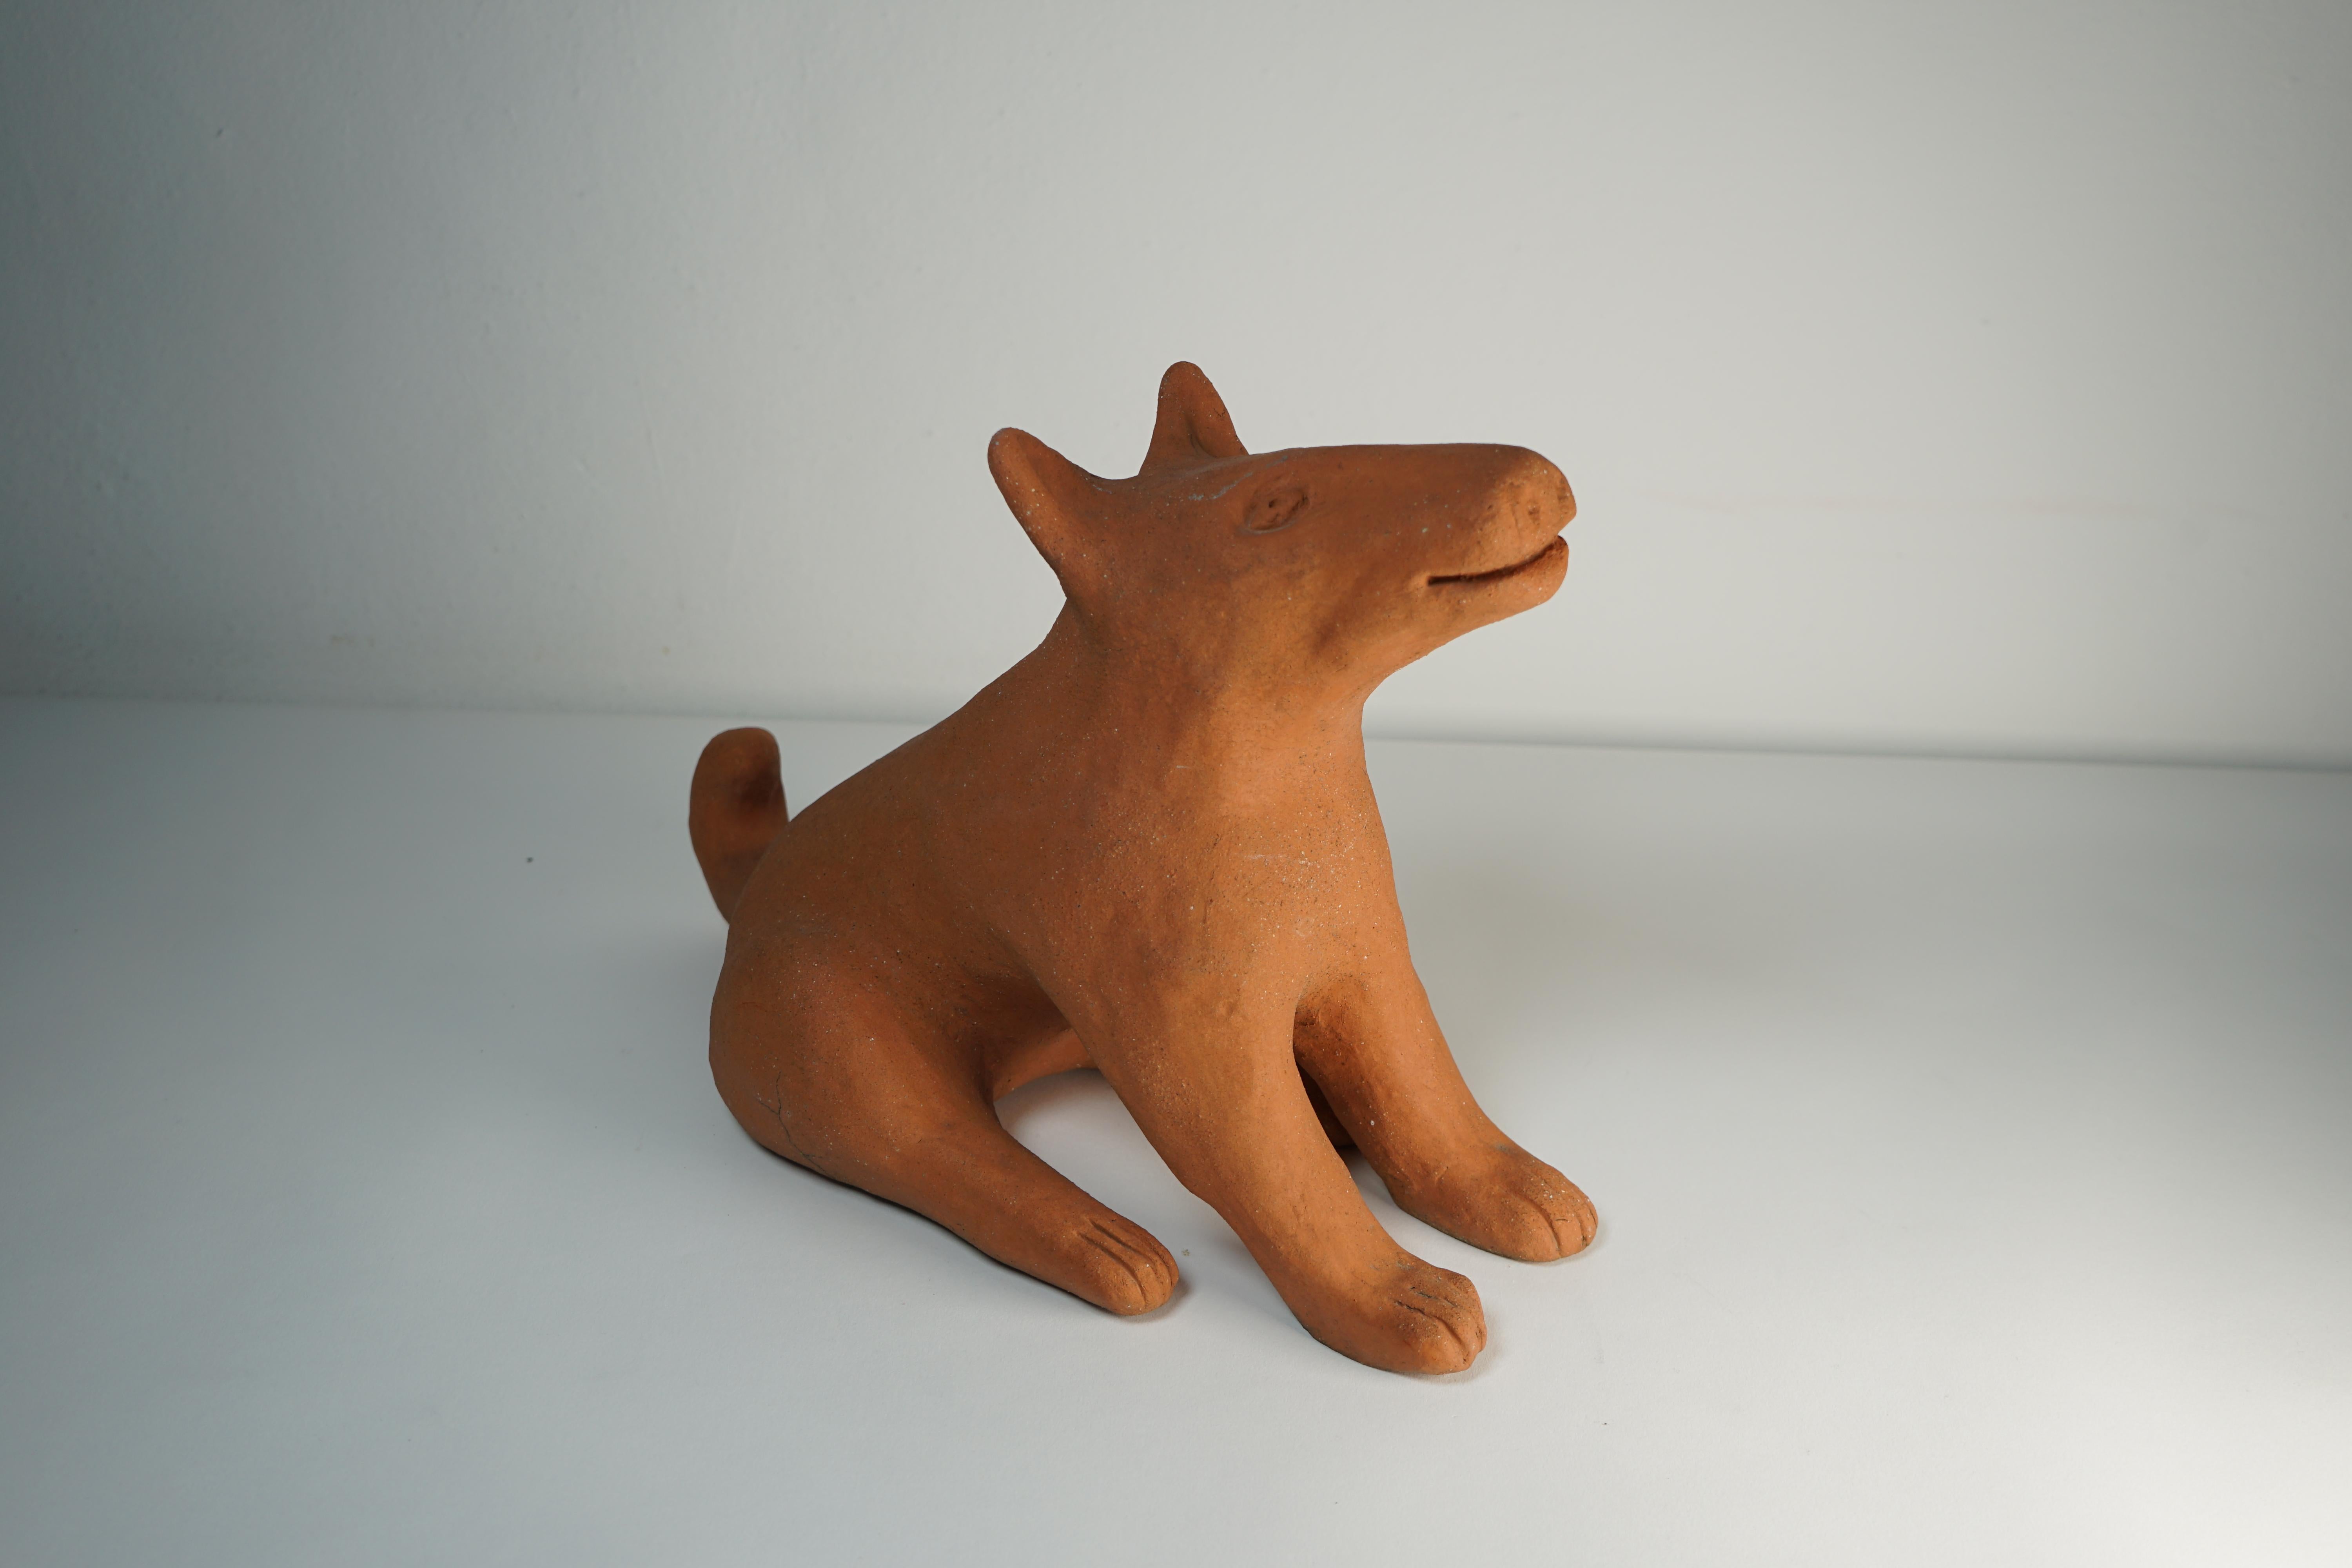 Italian Ceramic Sculpture Wolf Model by Nathalie du Pasquier for Alessio Sarri Editions For Sale